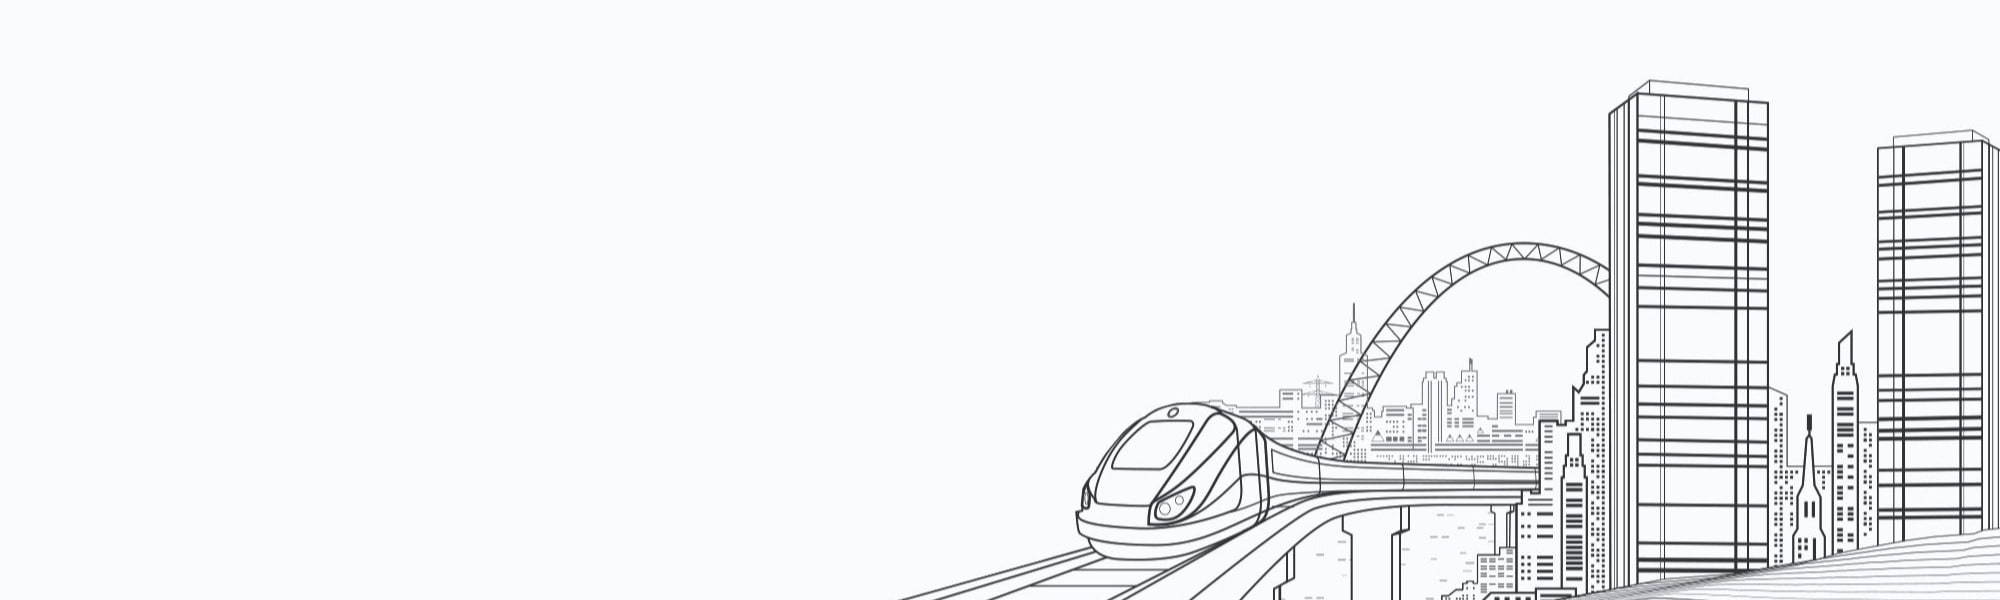 Banner image of cityscape with train